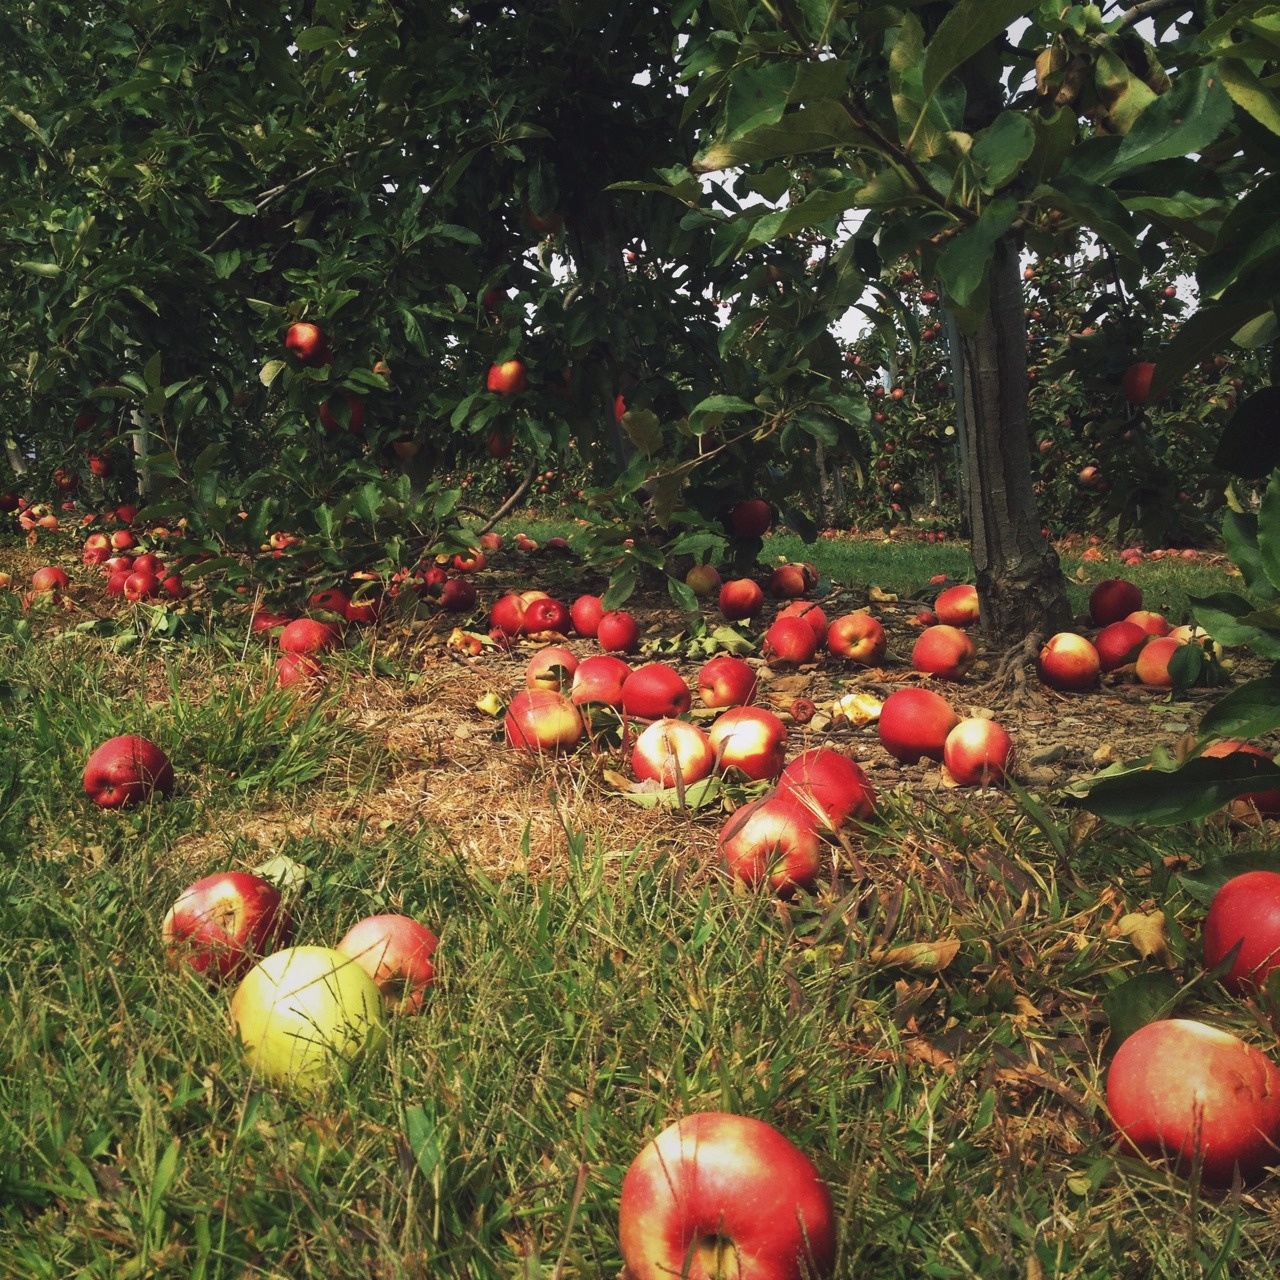 magickandmoss:  Today I went apple picking to get some apples for my pie for Mabon